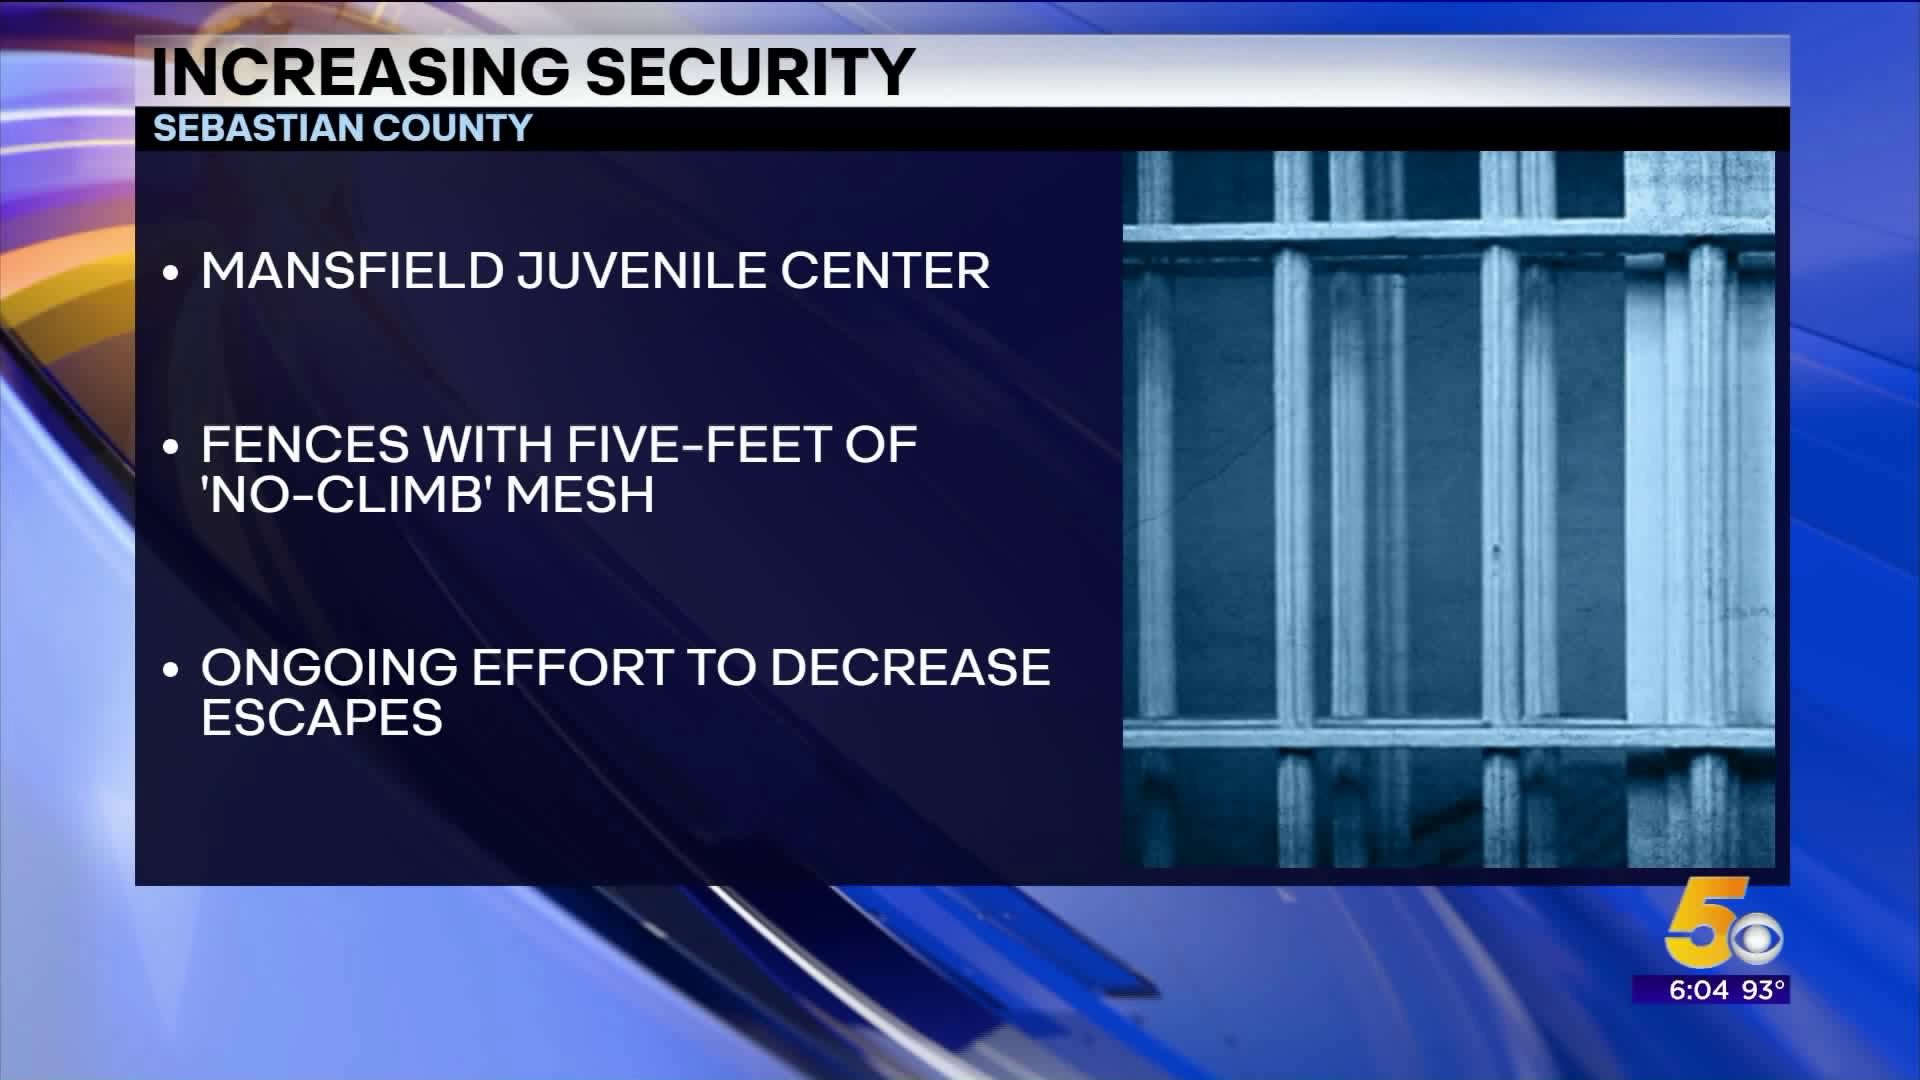 Increasing Security at Juvenile Detention Center